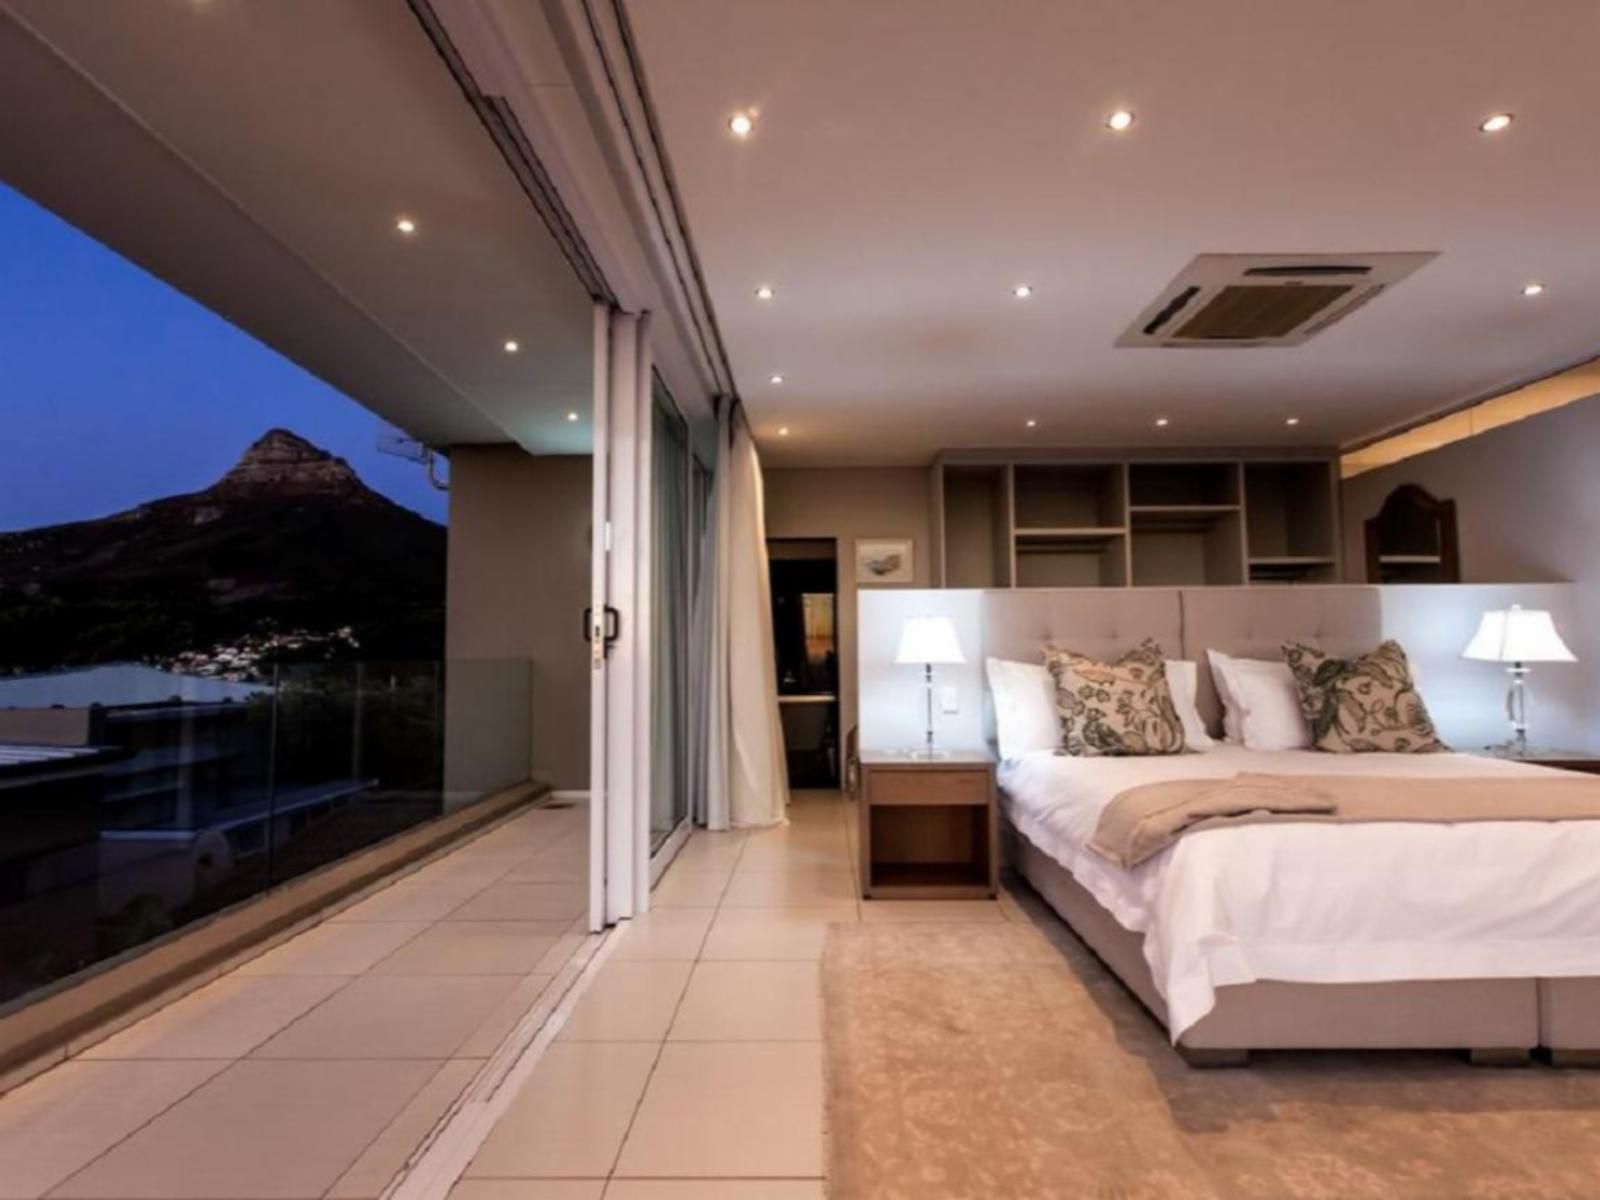 Villa On 1St Crescent Camps Bay Cape Town Western Cape South Africa Bedroom